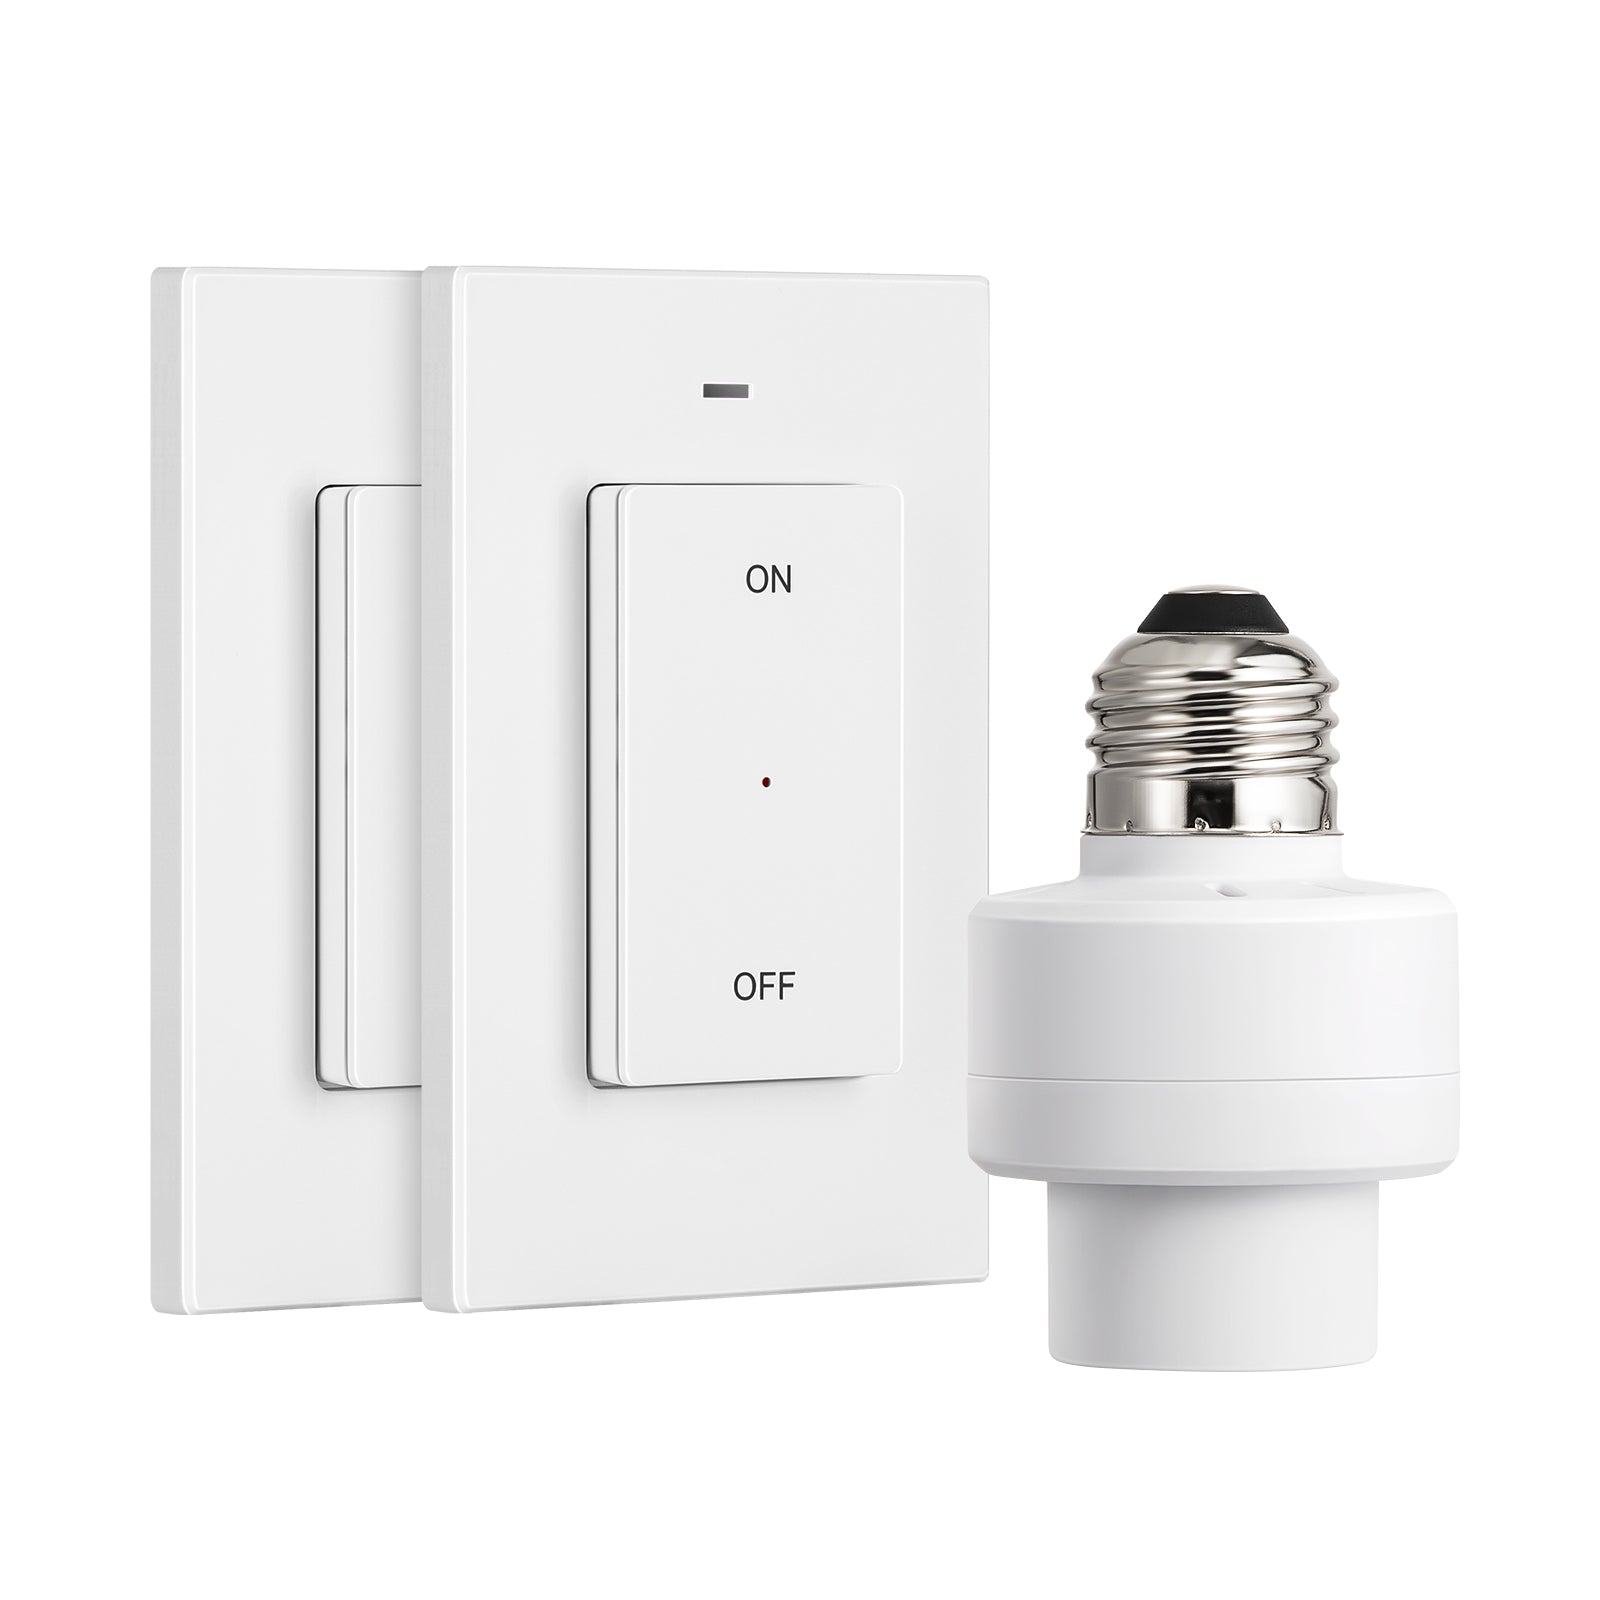 DEWENWILS Wireless Light Switch, No Wiring, Programmed and Expandable, 100  Ft RF Range, Remote Control Wall Light Switch Kit, Remote Switch Lighting